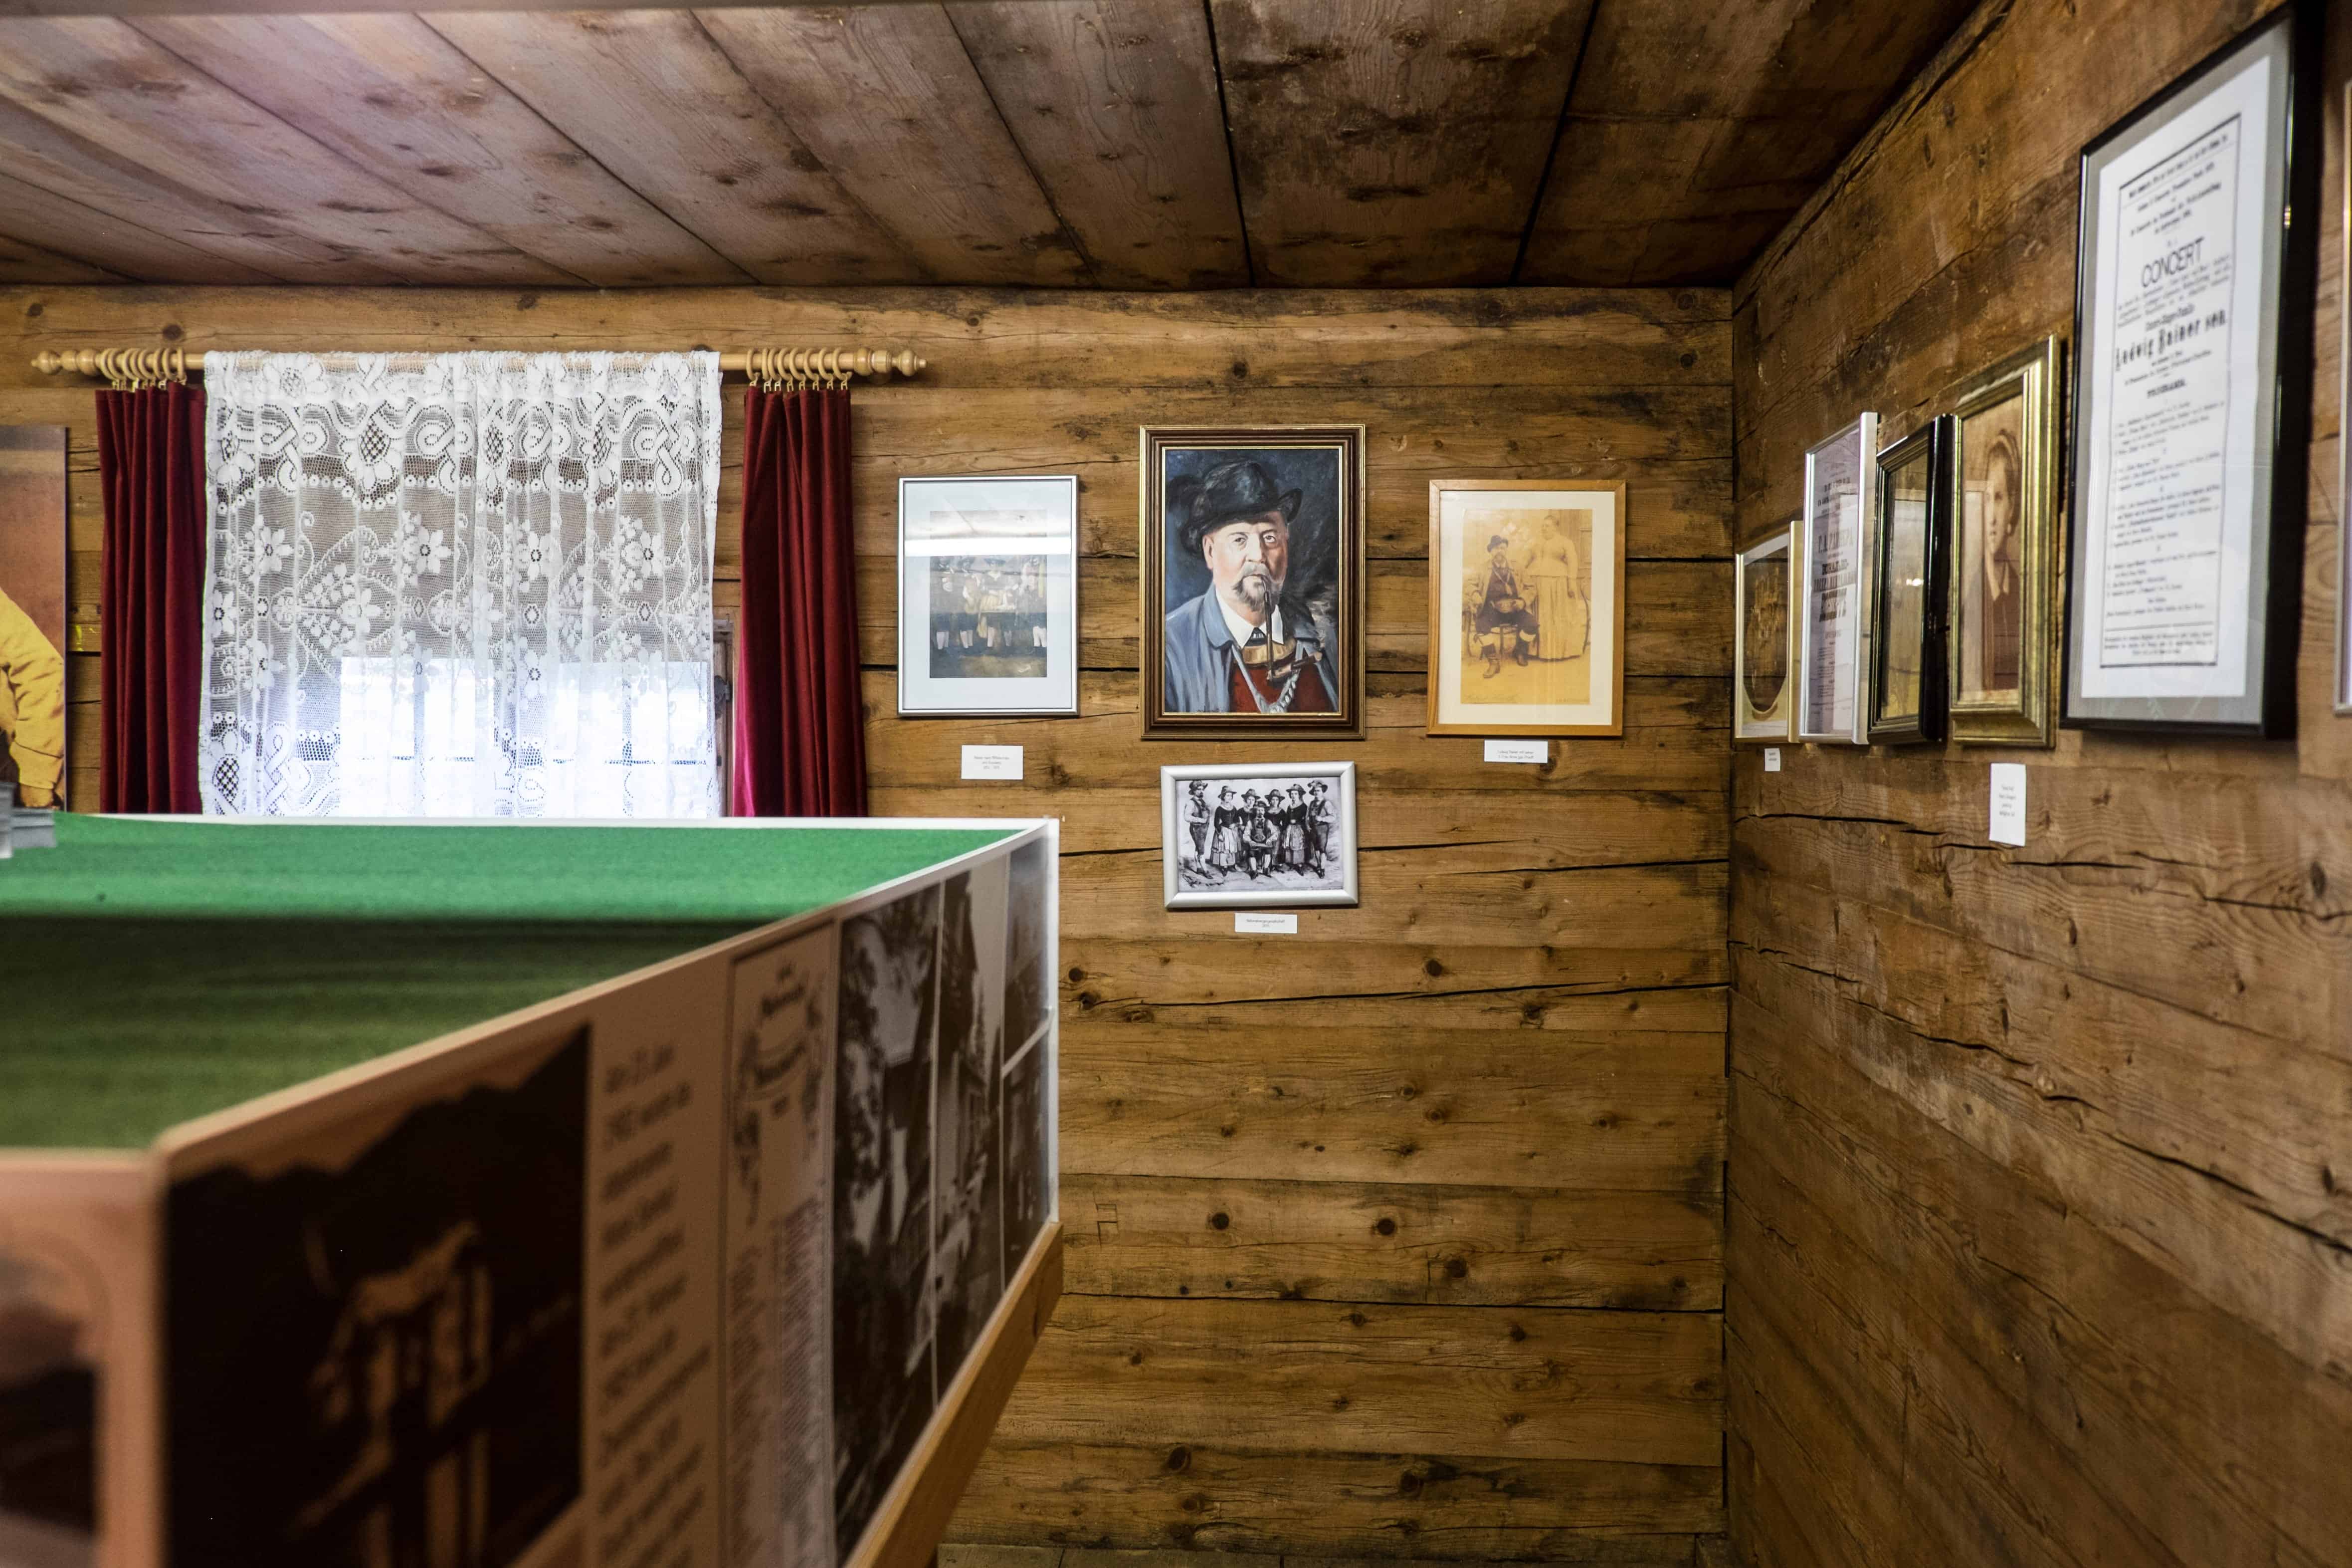 Inside Sixenhof Museum in Achensee, Austria with Silent Night Anniversary exhibition